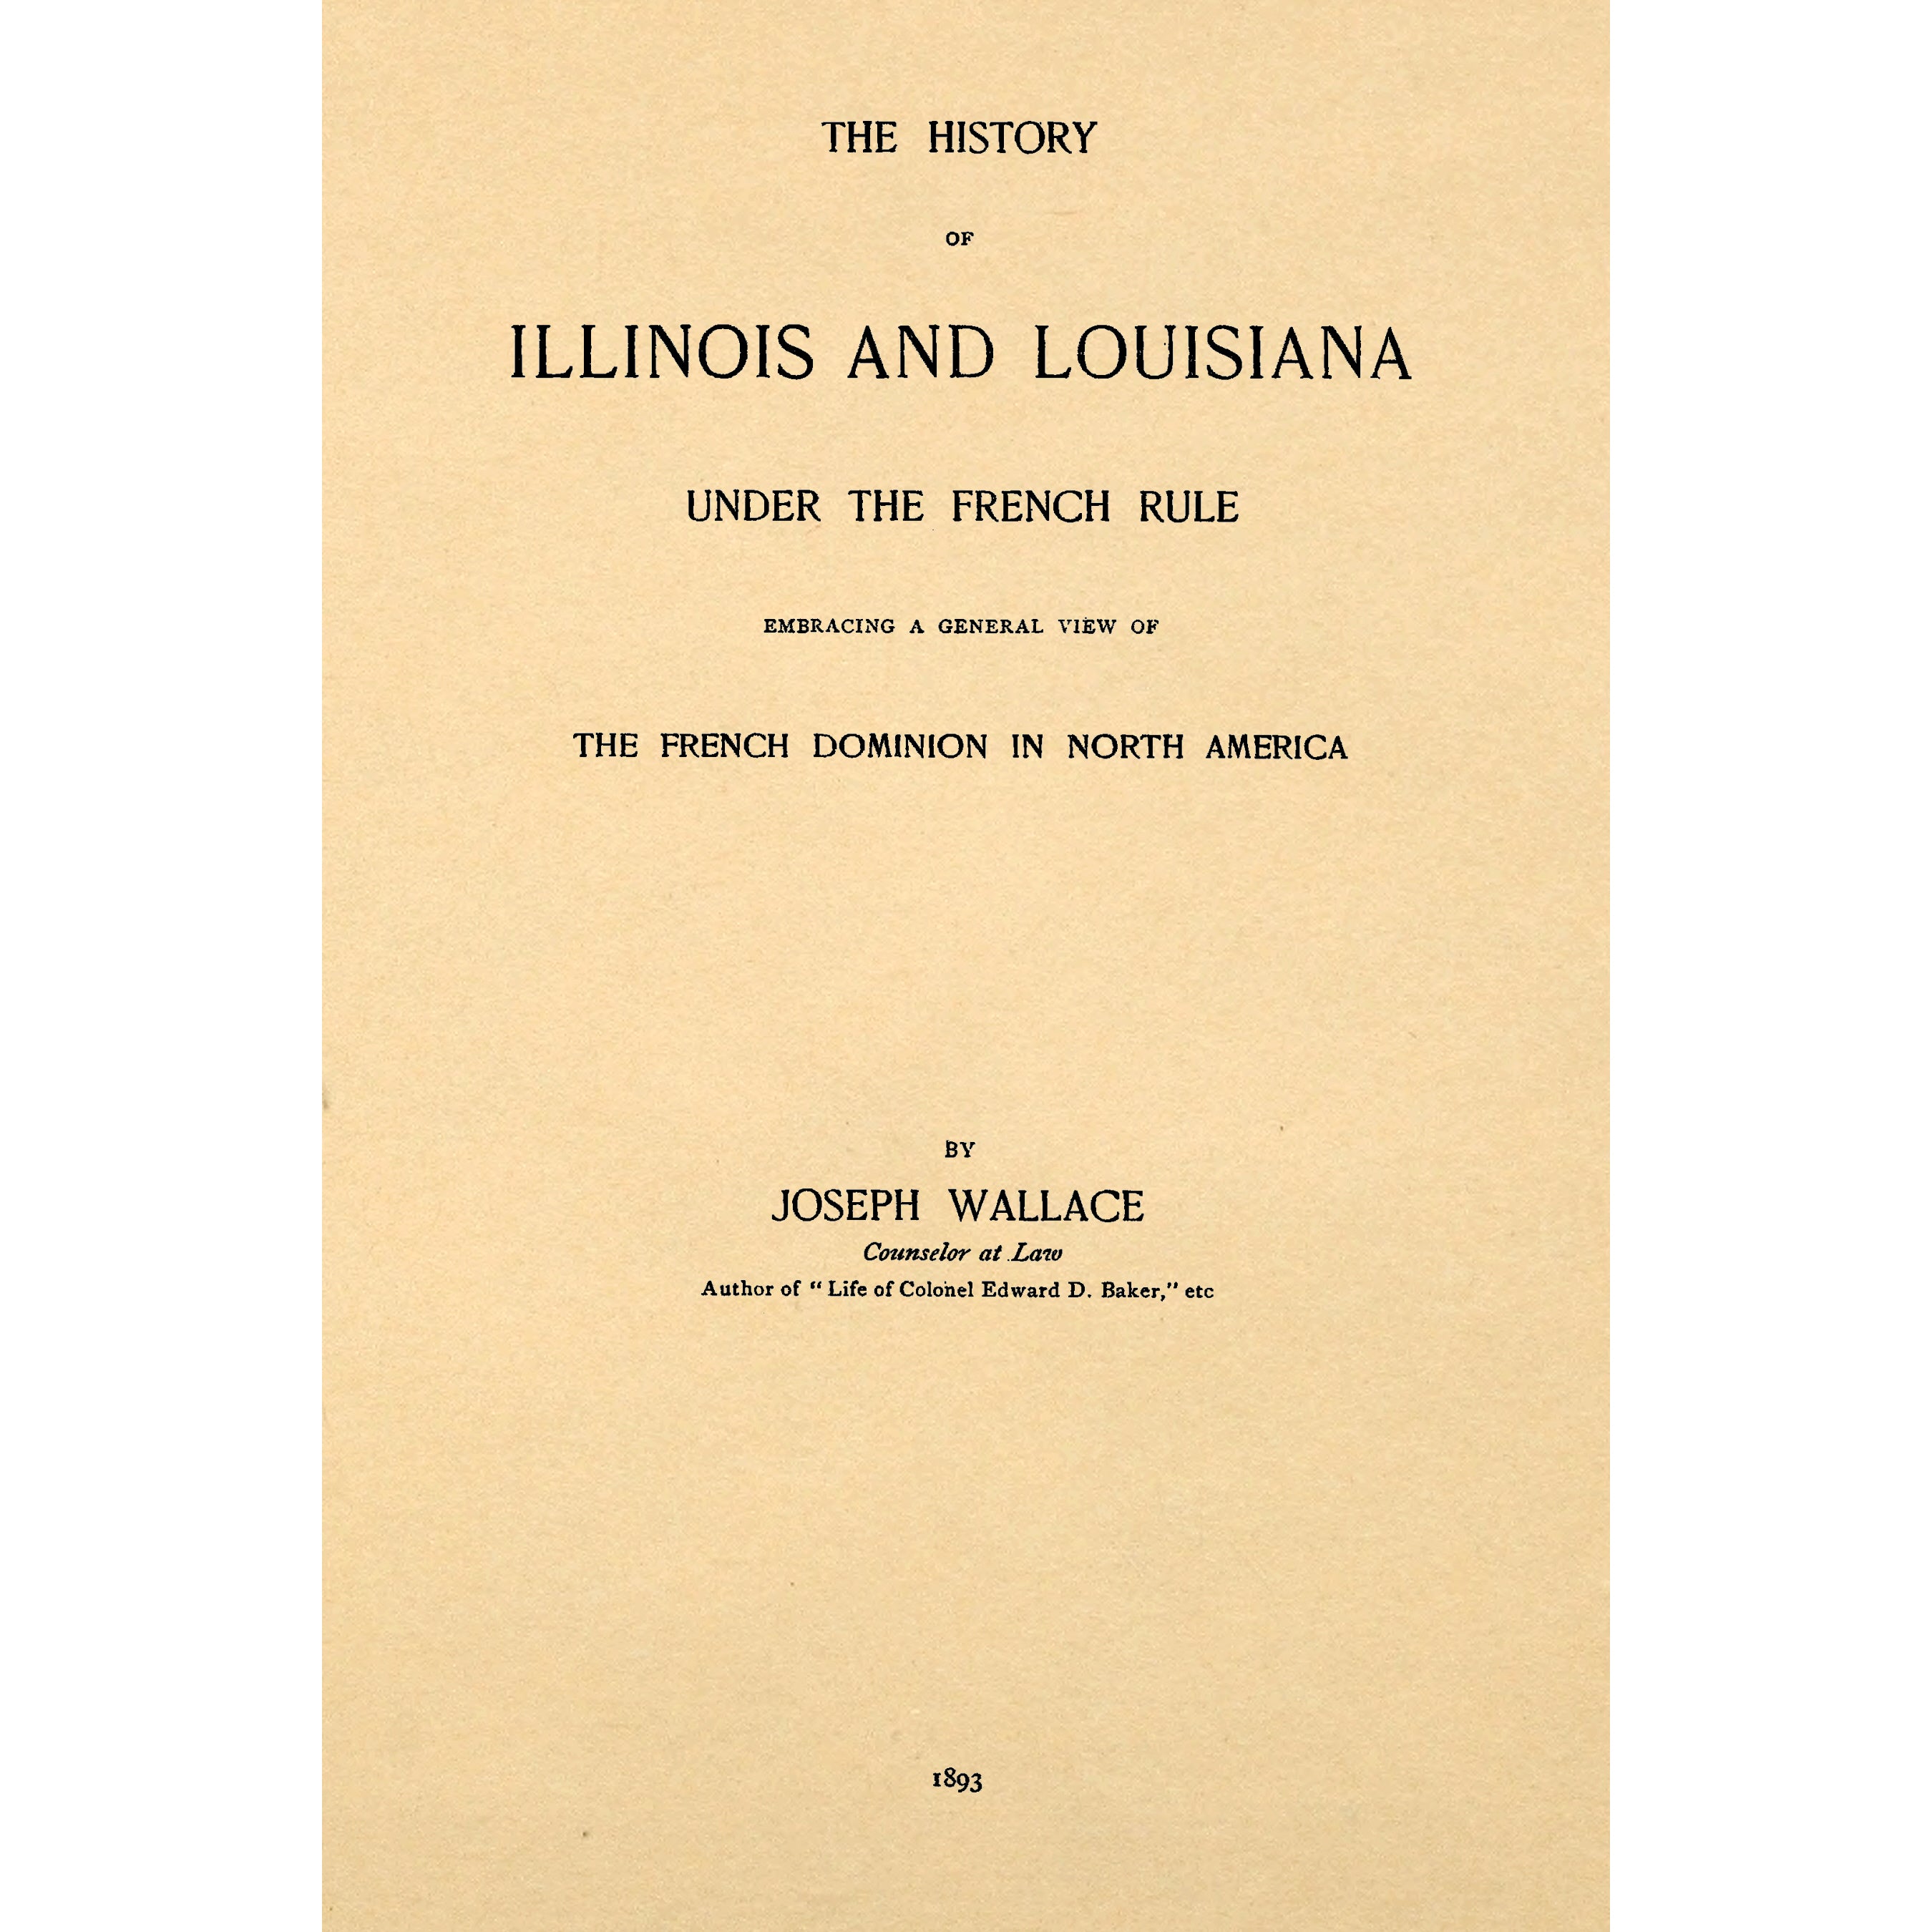 The history of Illinois and Louisiana under the French rule